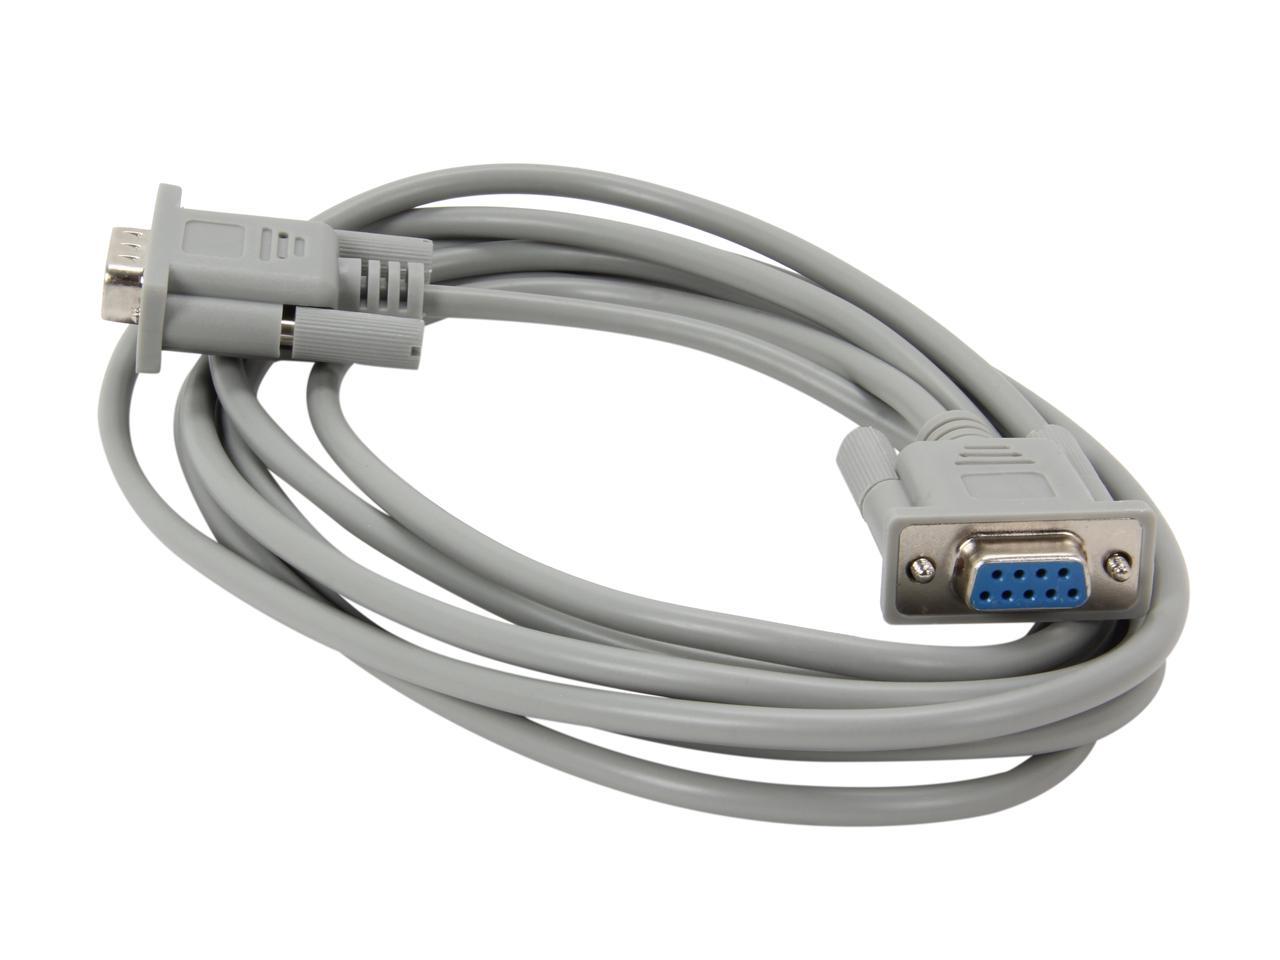 StarTech.com Model SCNM9FM 10 ft. DB9 RS232 Serial Null Modem Cable Female to Male